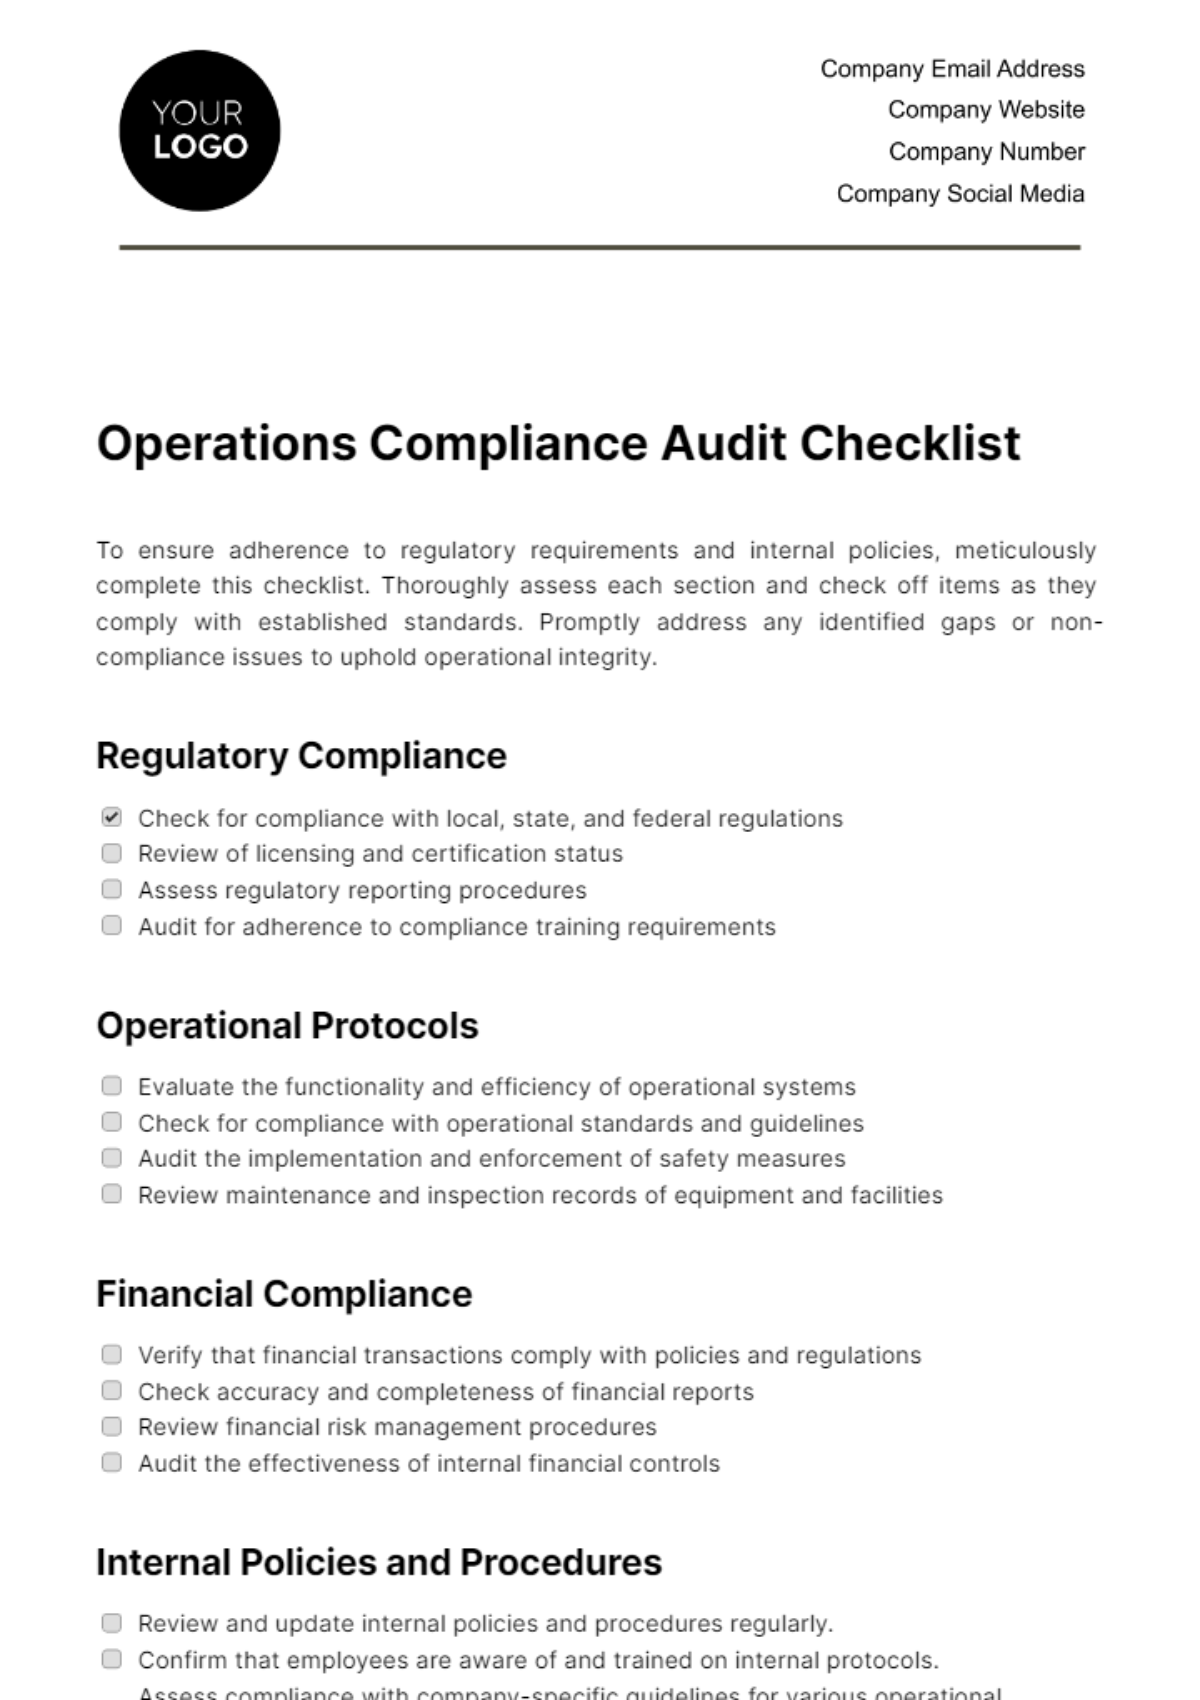 Operations Compliance Audit Checklist Template